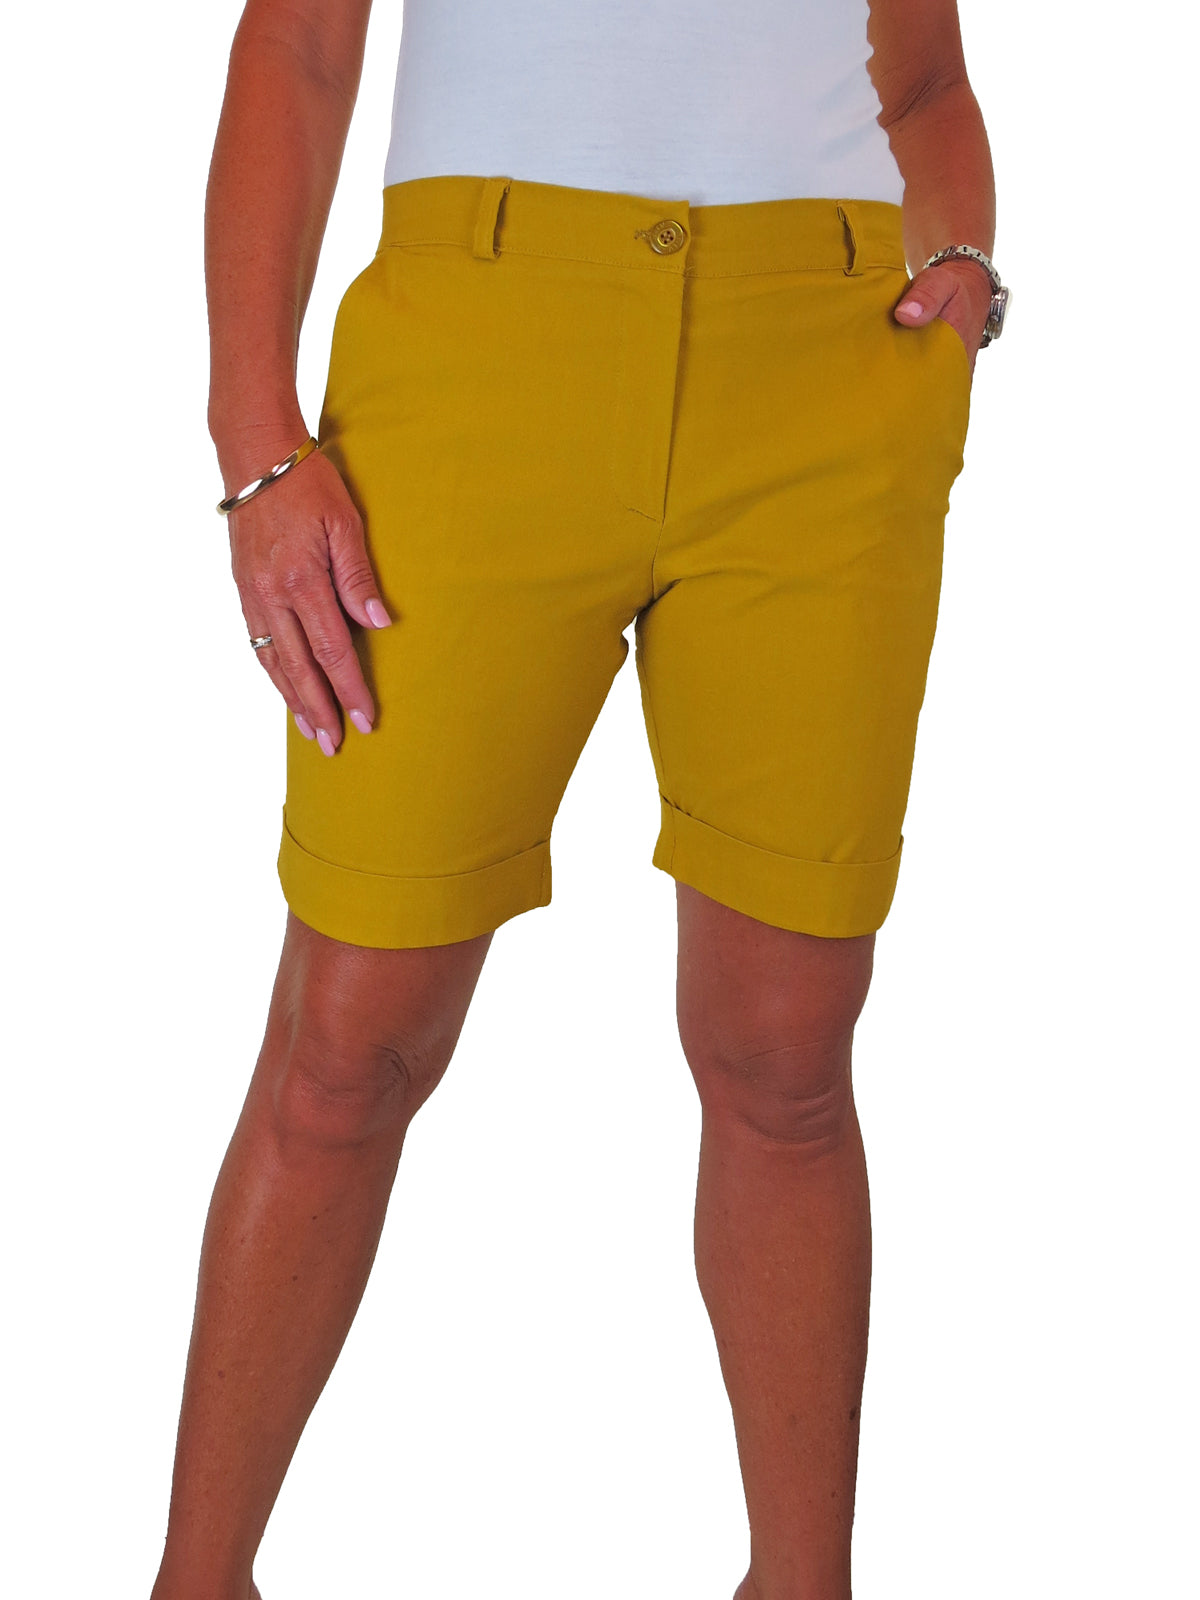 Ladies Above The Knee Stretch Shorts Mustard Yellow